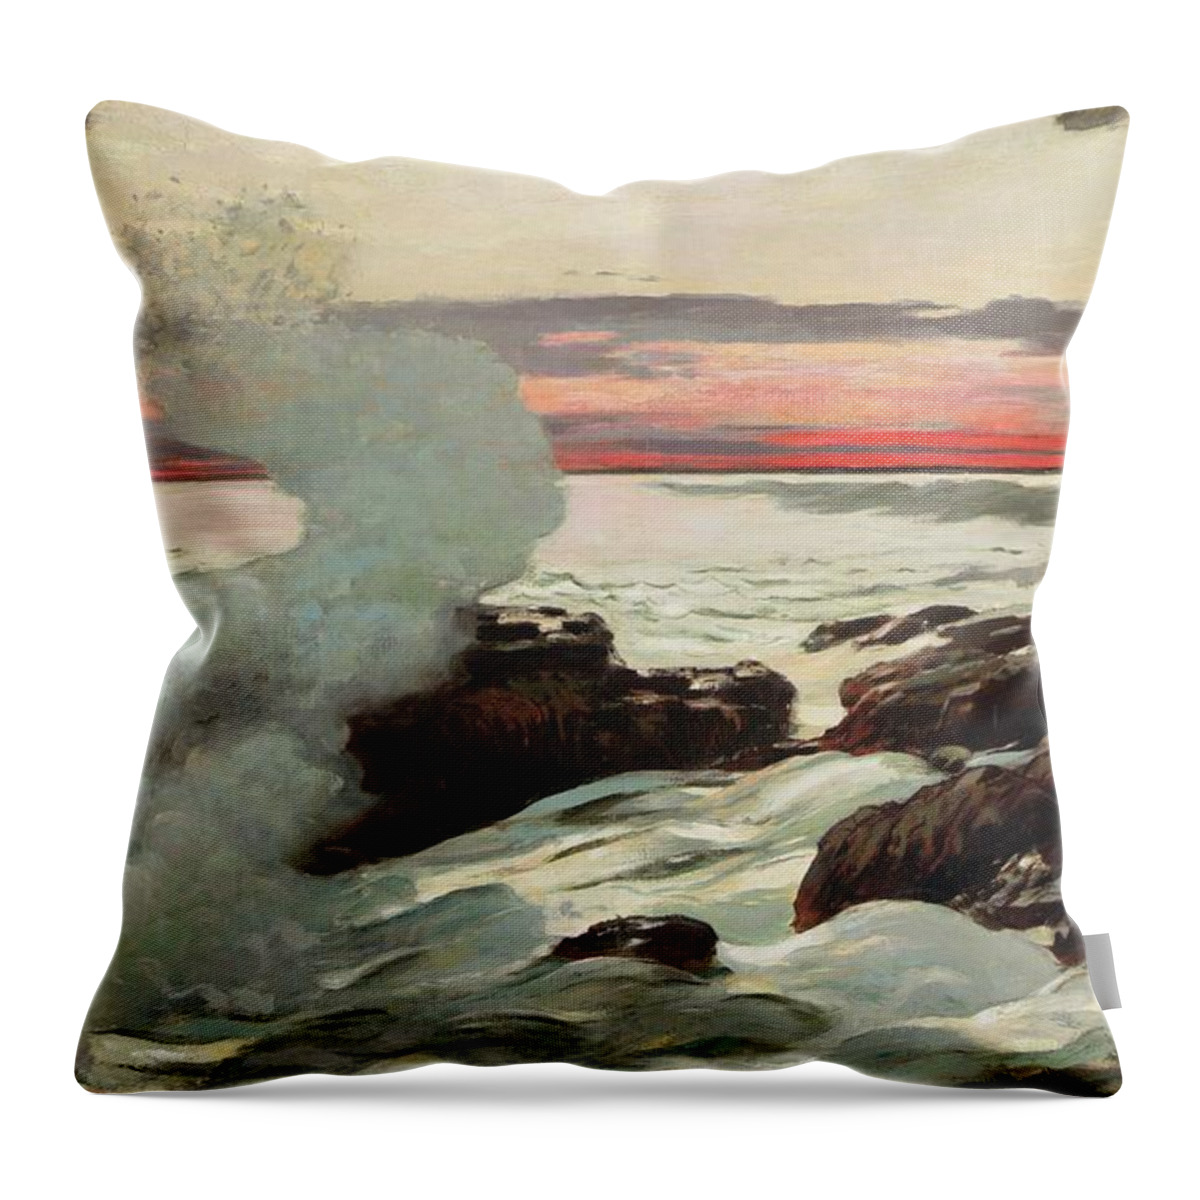 West Point Throw Pillow featuring the painting West Point Prouts Neck by Winslow Homer